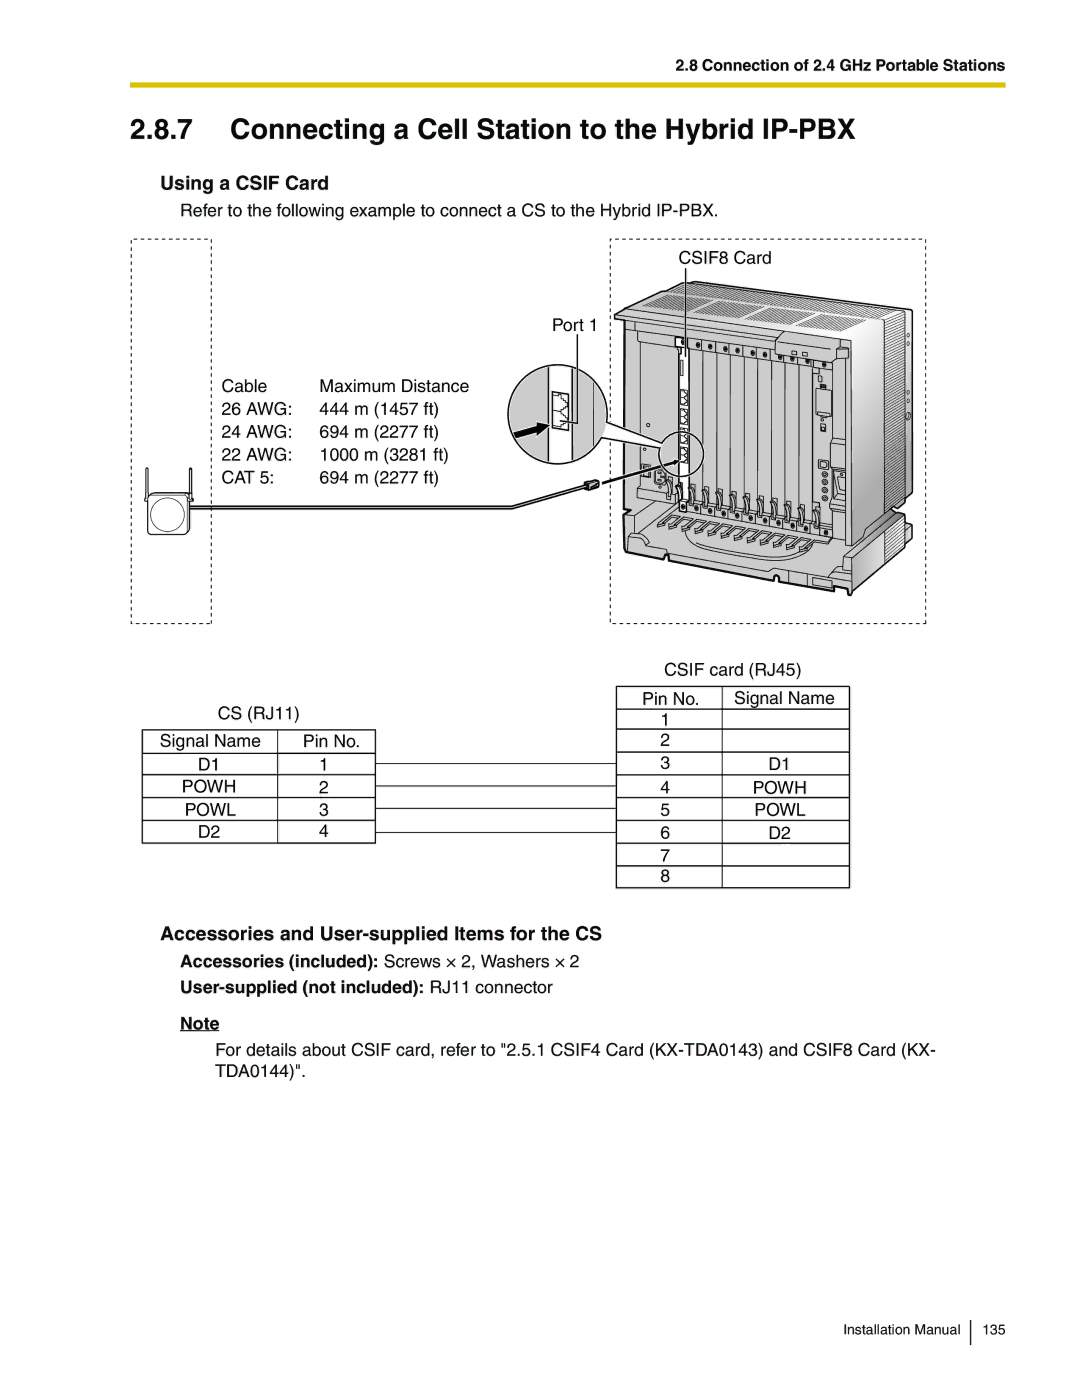 Panasonic KX-TDA100 installation manual Connecting a Cell Station to the Hybrid IP-PBX, Using a Csif Card, Powh Powl 